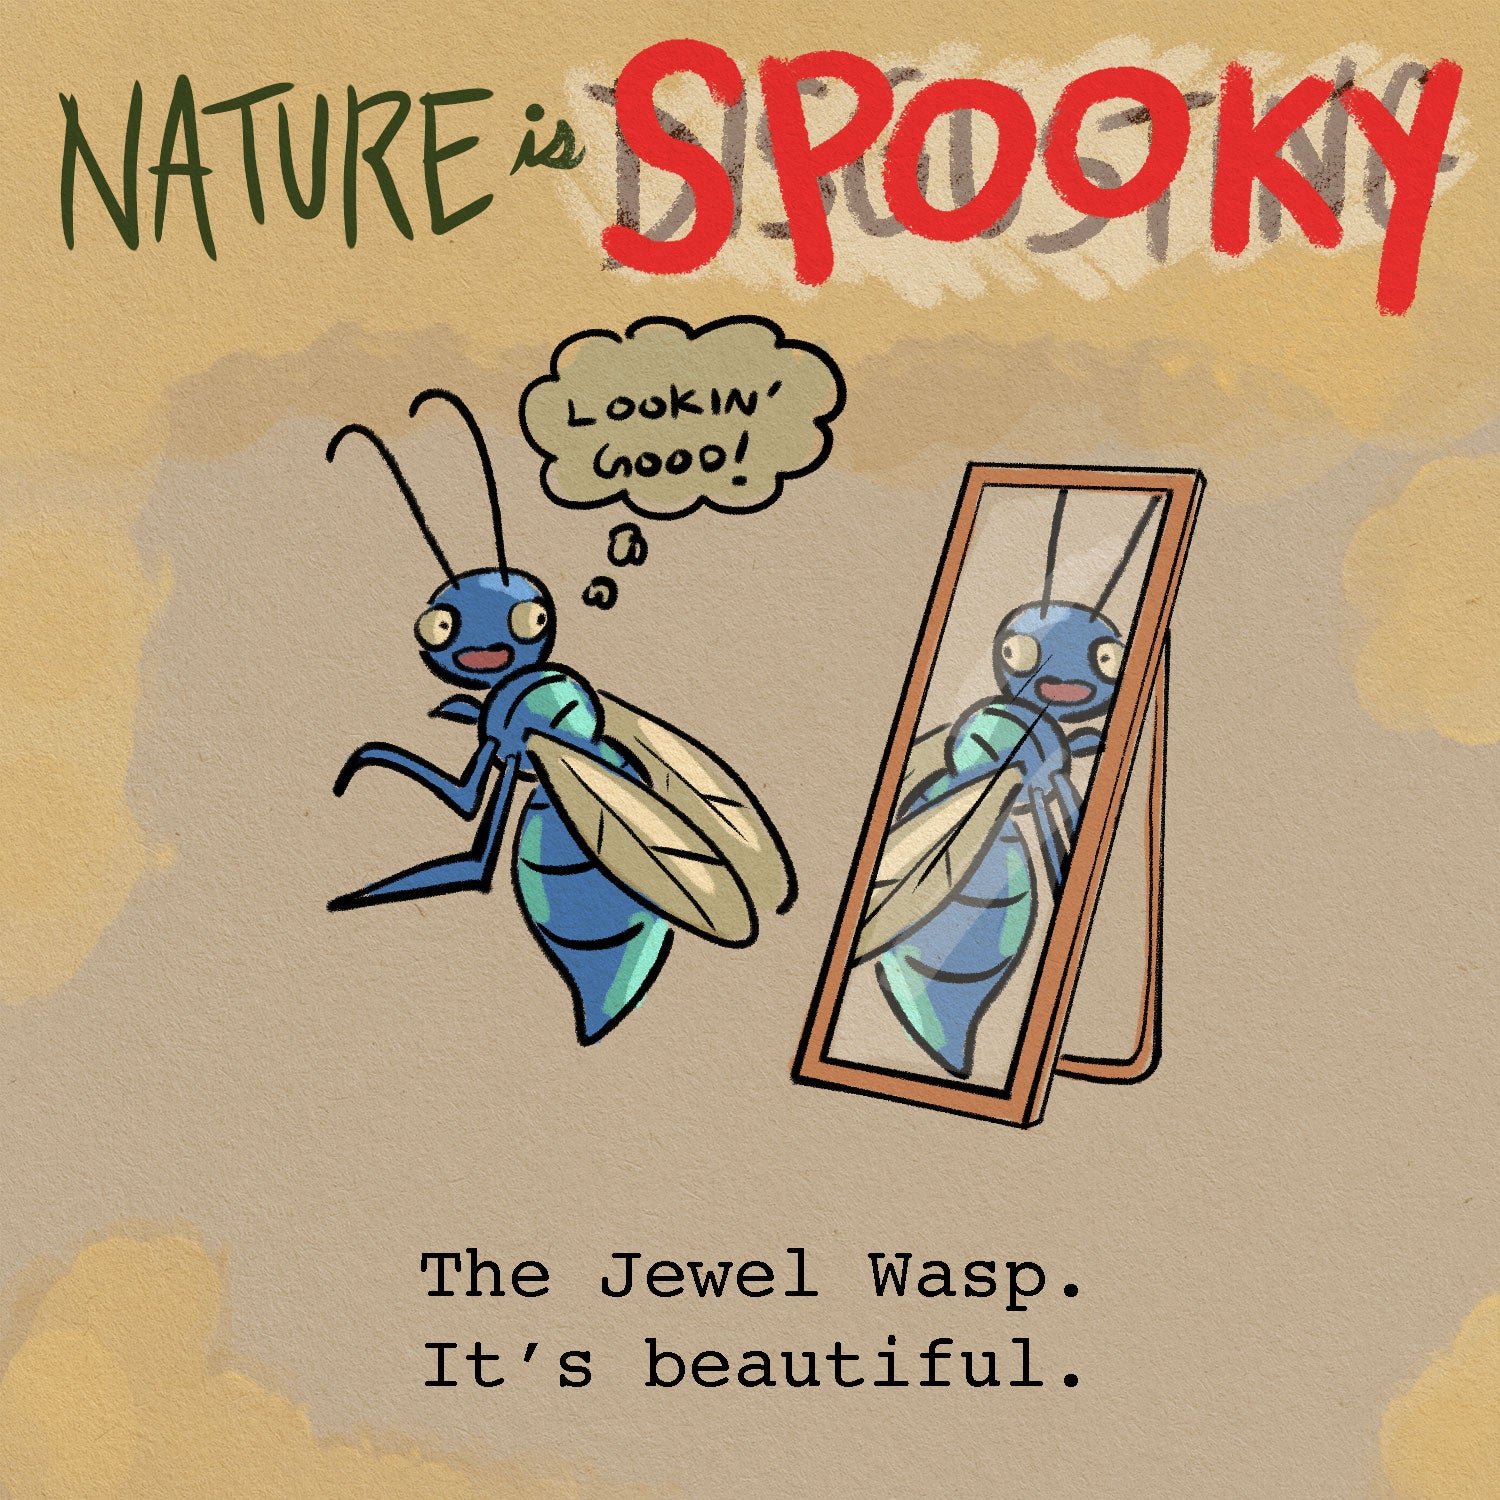 Nature is Disgusting - The Jewel Wasp